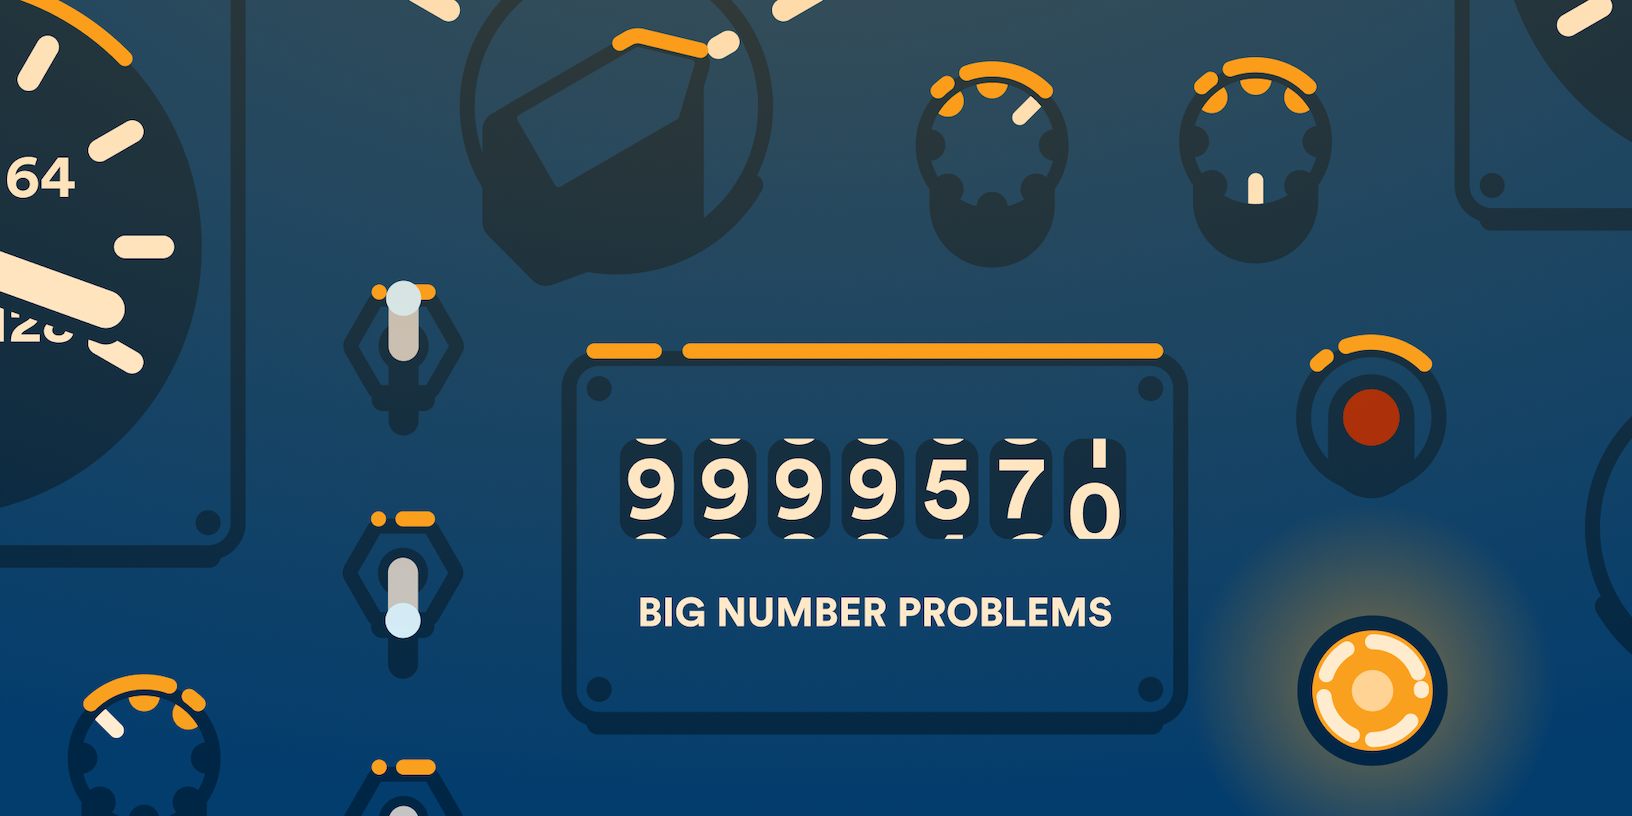 Header image of an odometer nearing its max number. The label reads "Big Number Problems"